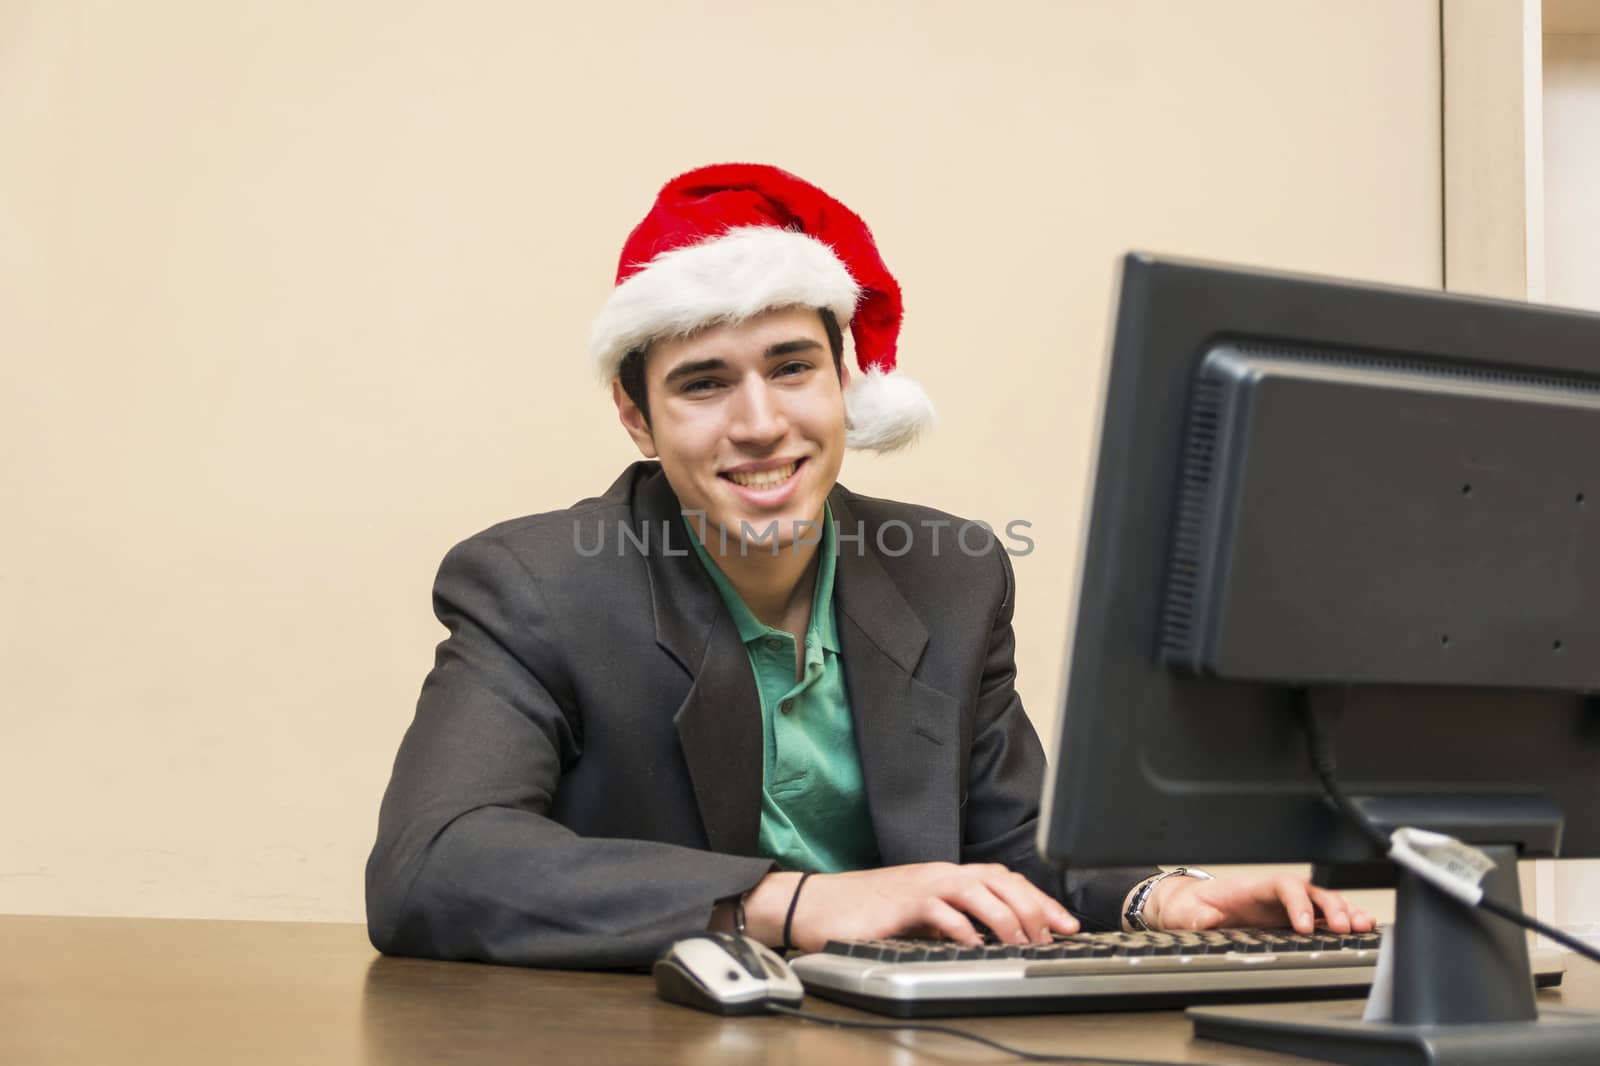 Smiling young businessman with Santa Claus red hat by artofphoto